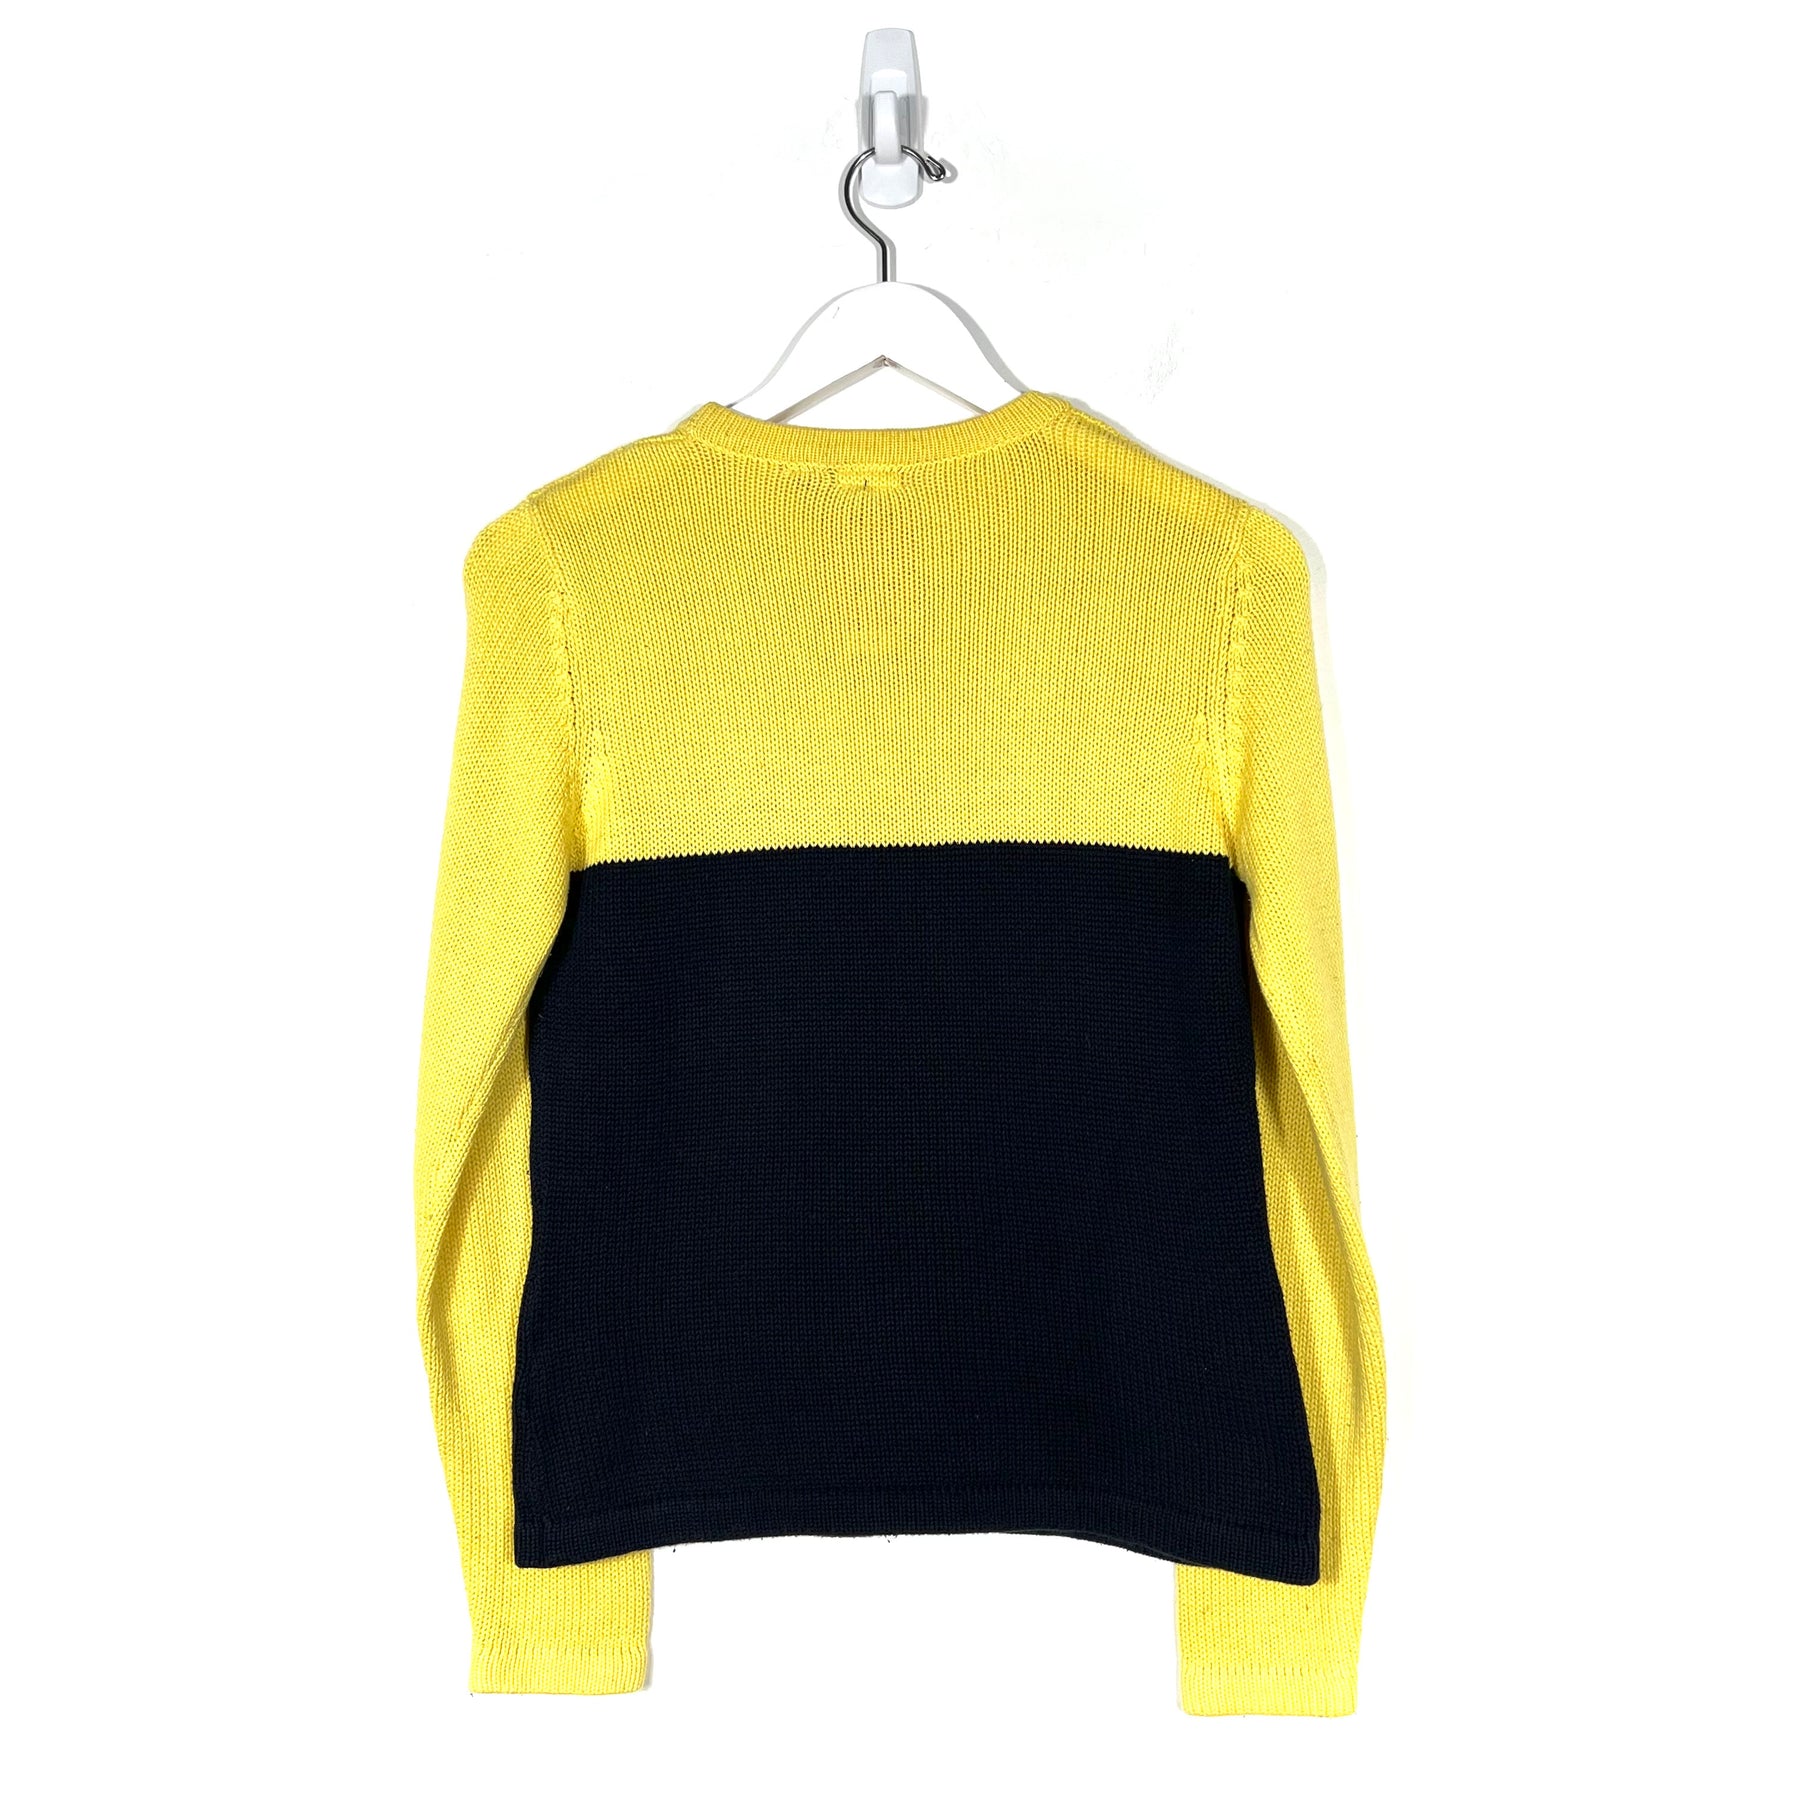 Guess Colorblock Sweater - Women's Small